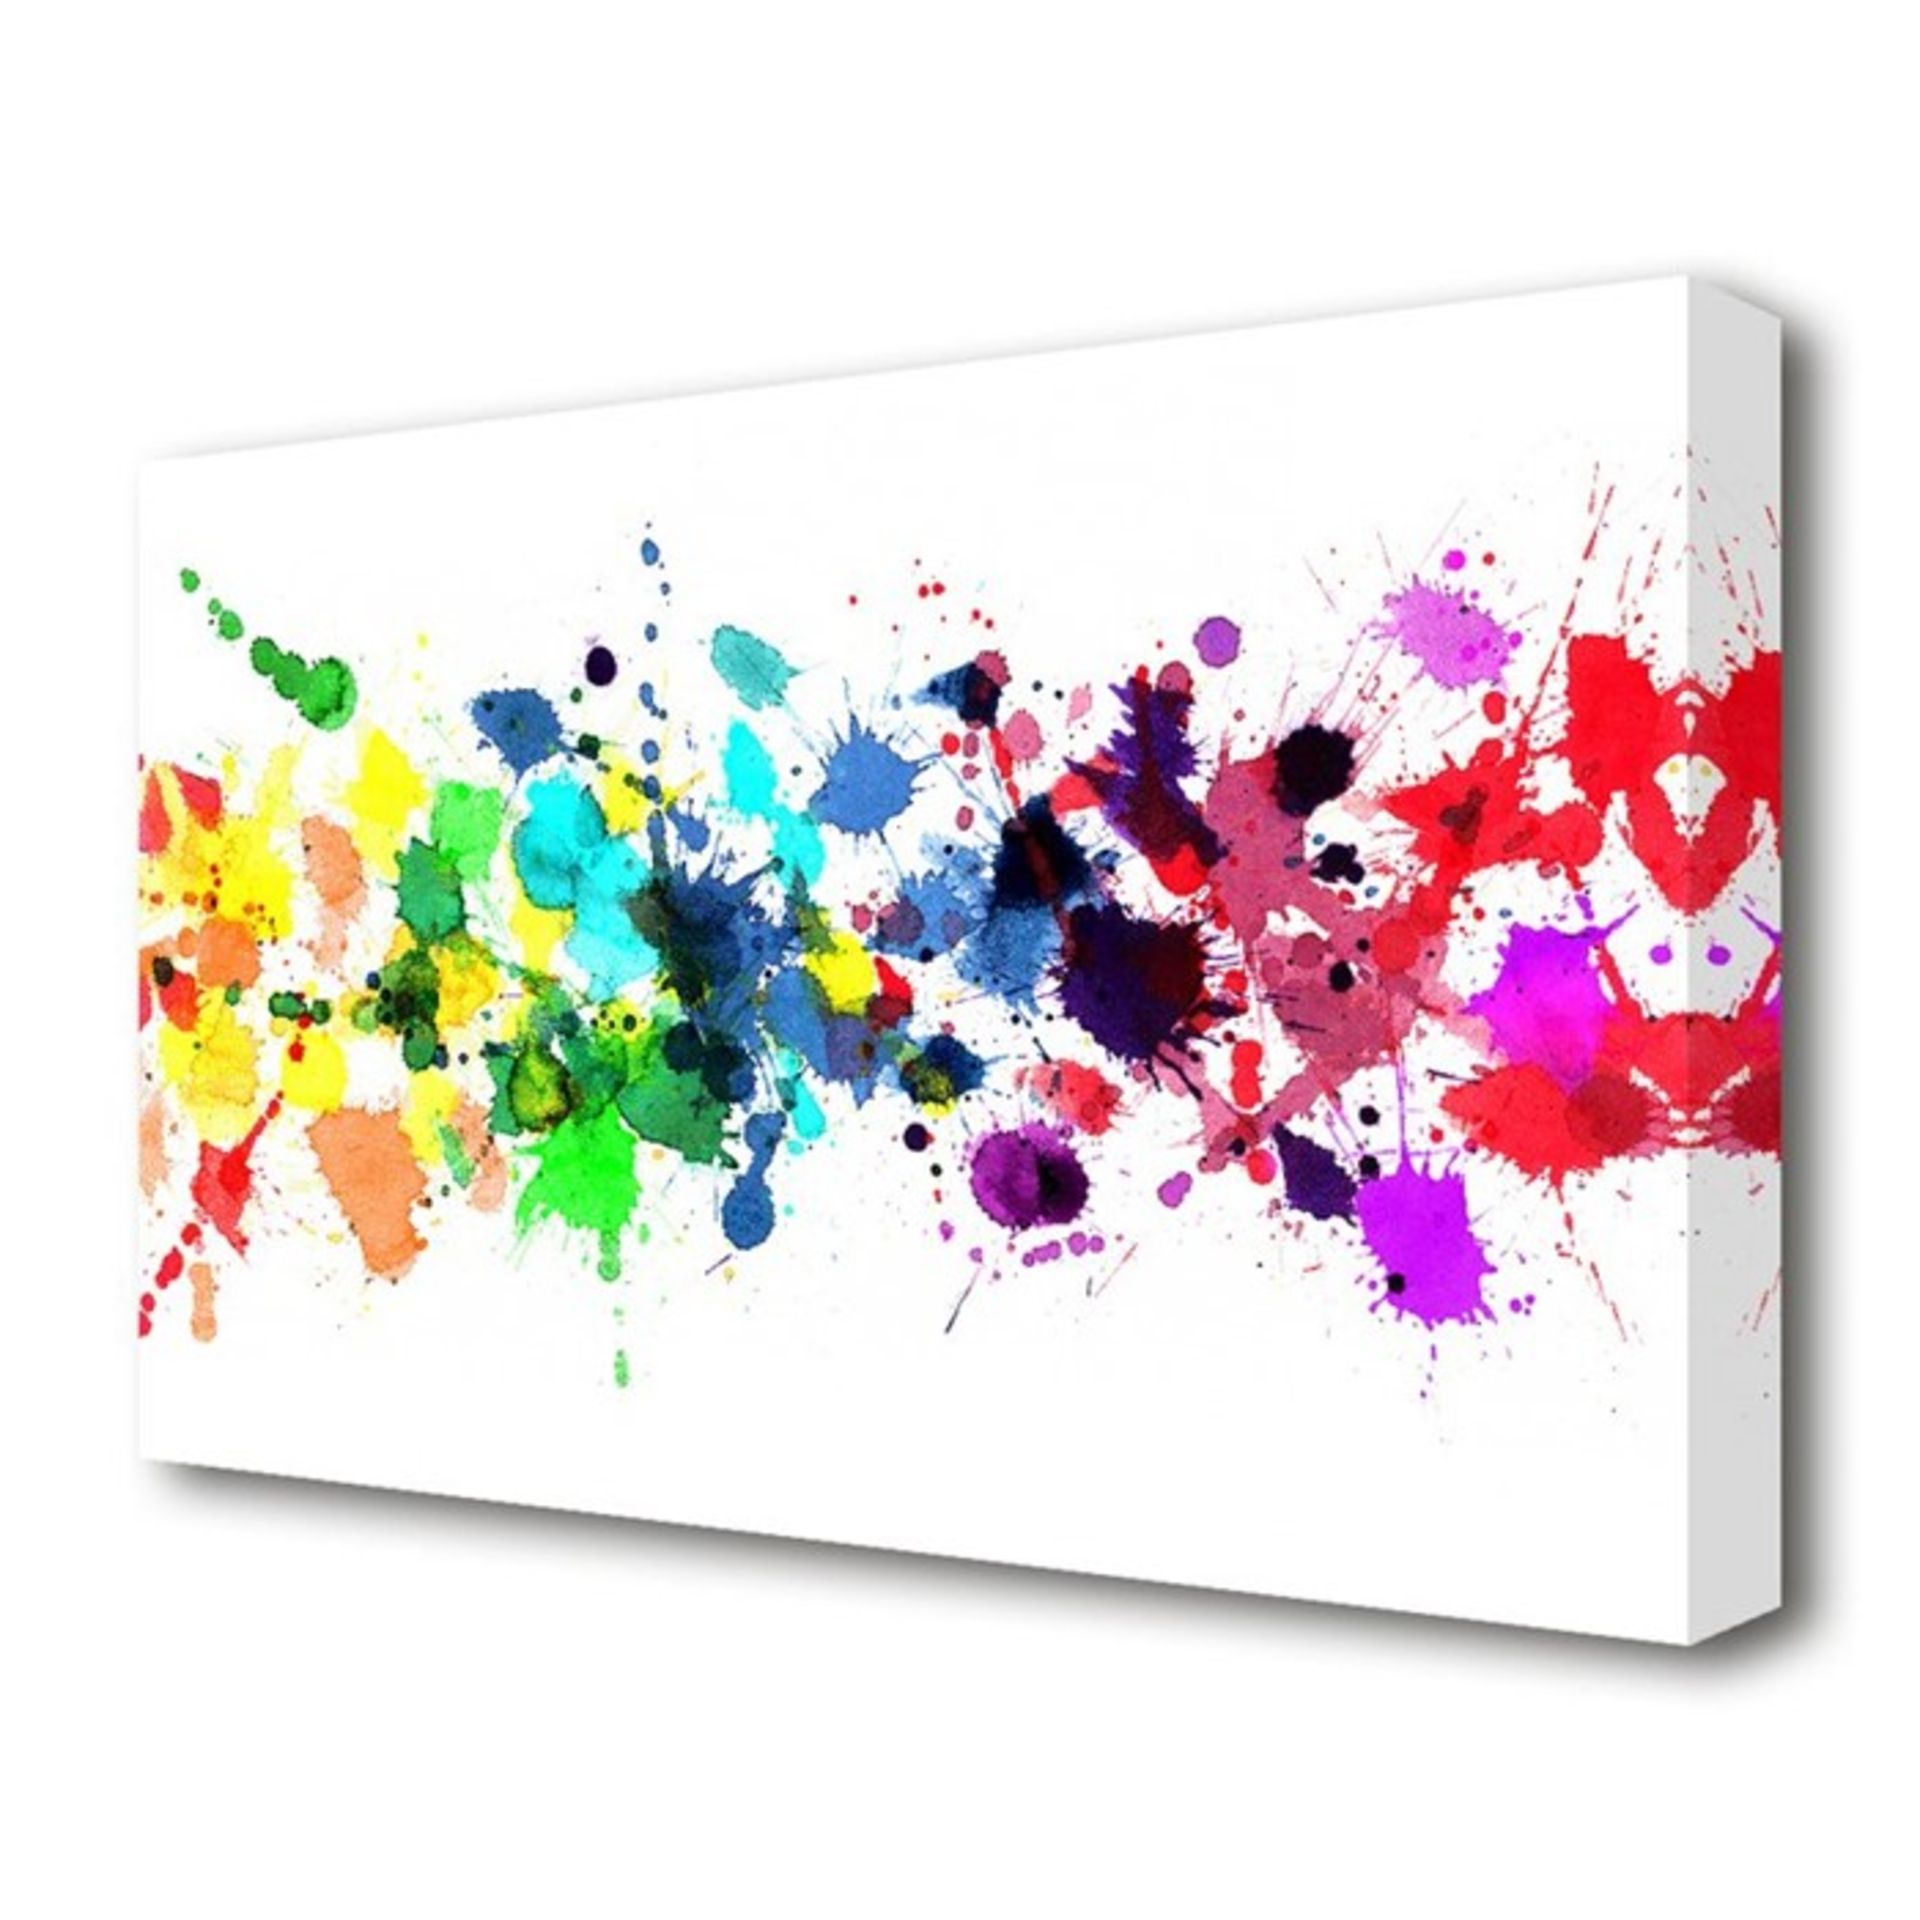 East Urban Home, 'Colour Raindrops' Painting Print on Canvas - RRP £43.99 (BGSY5906 - 18240/11) 1G